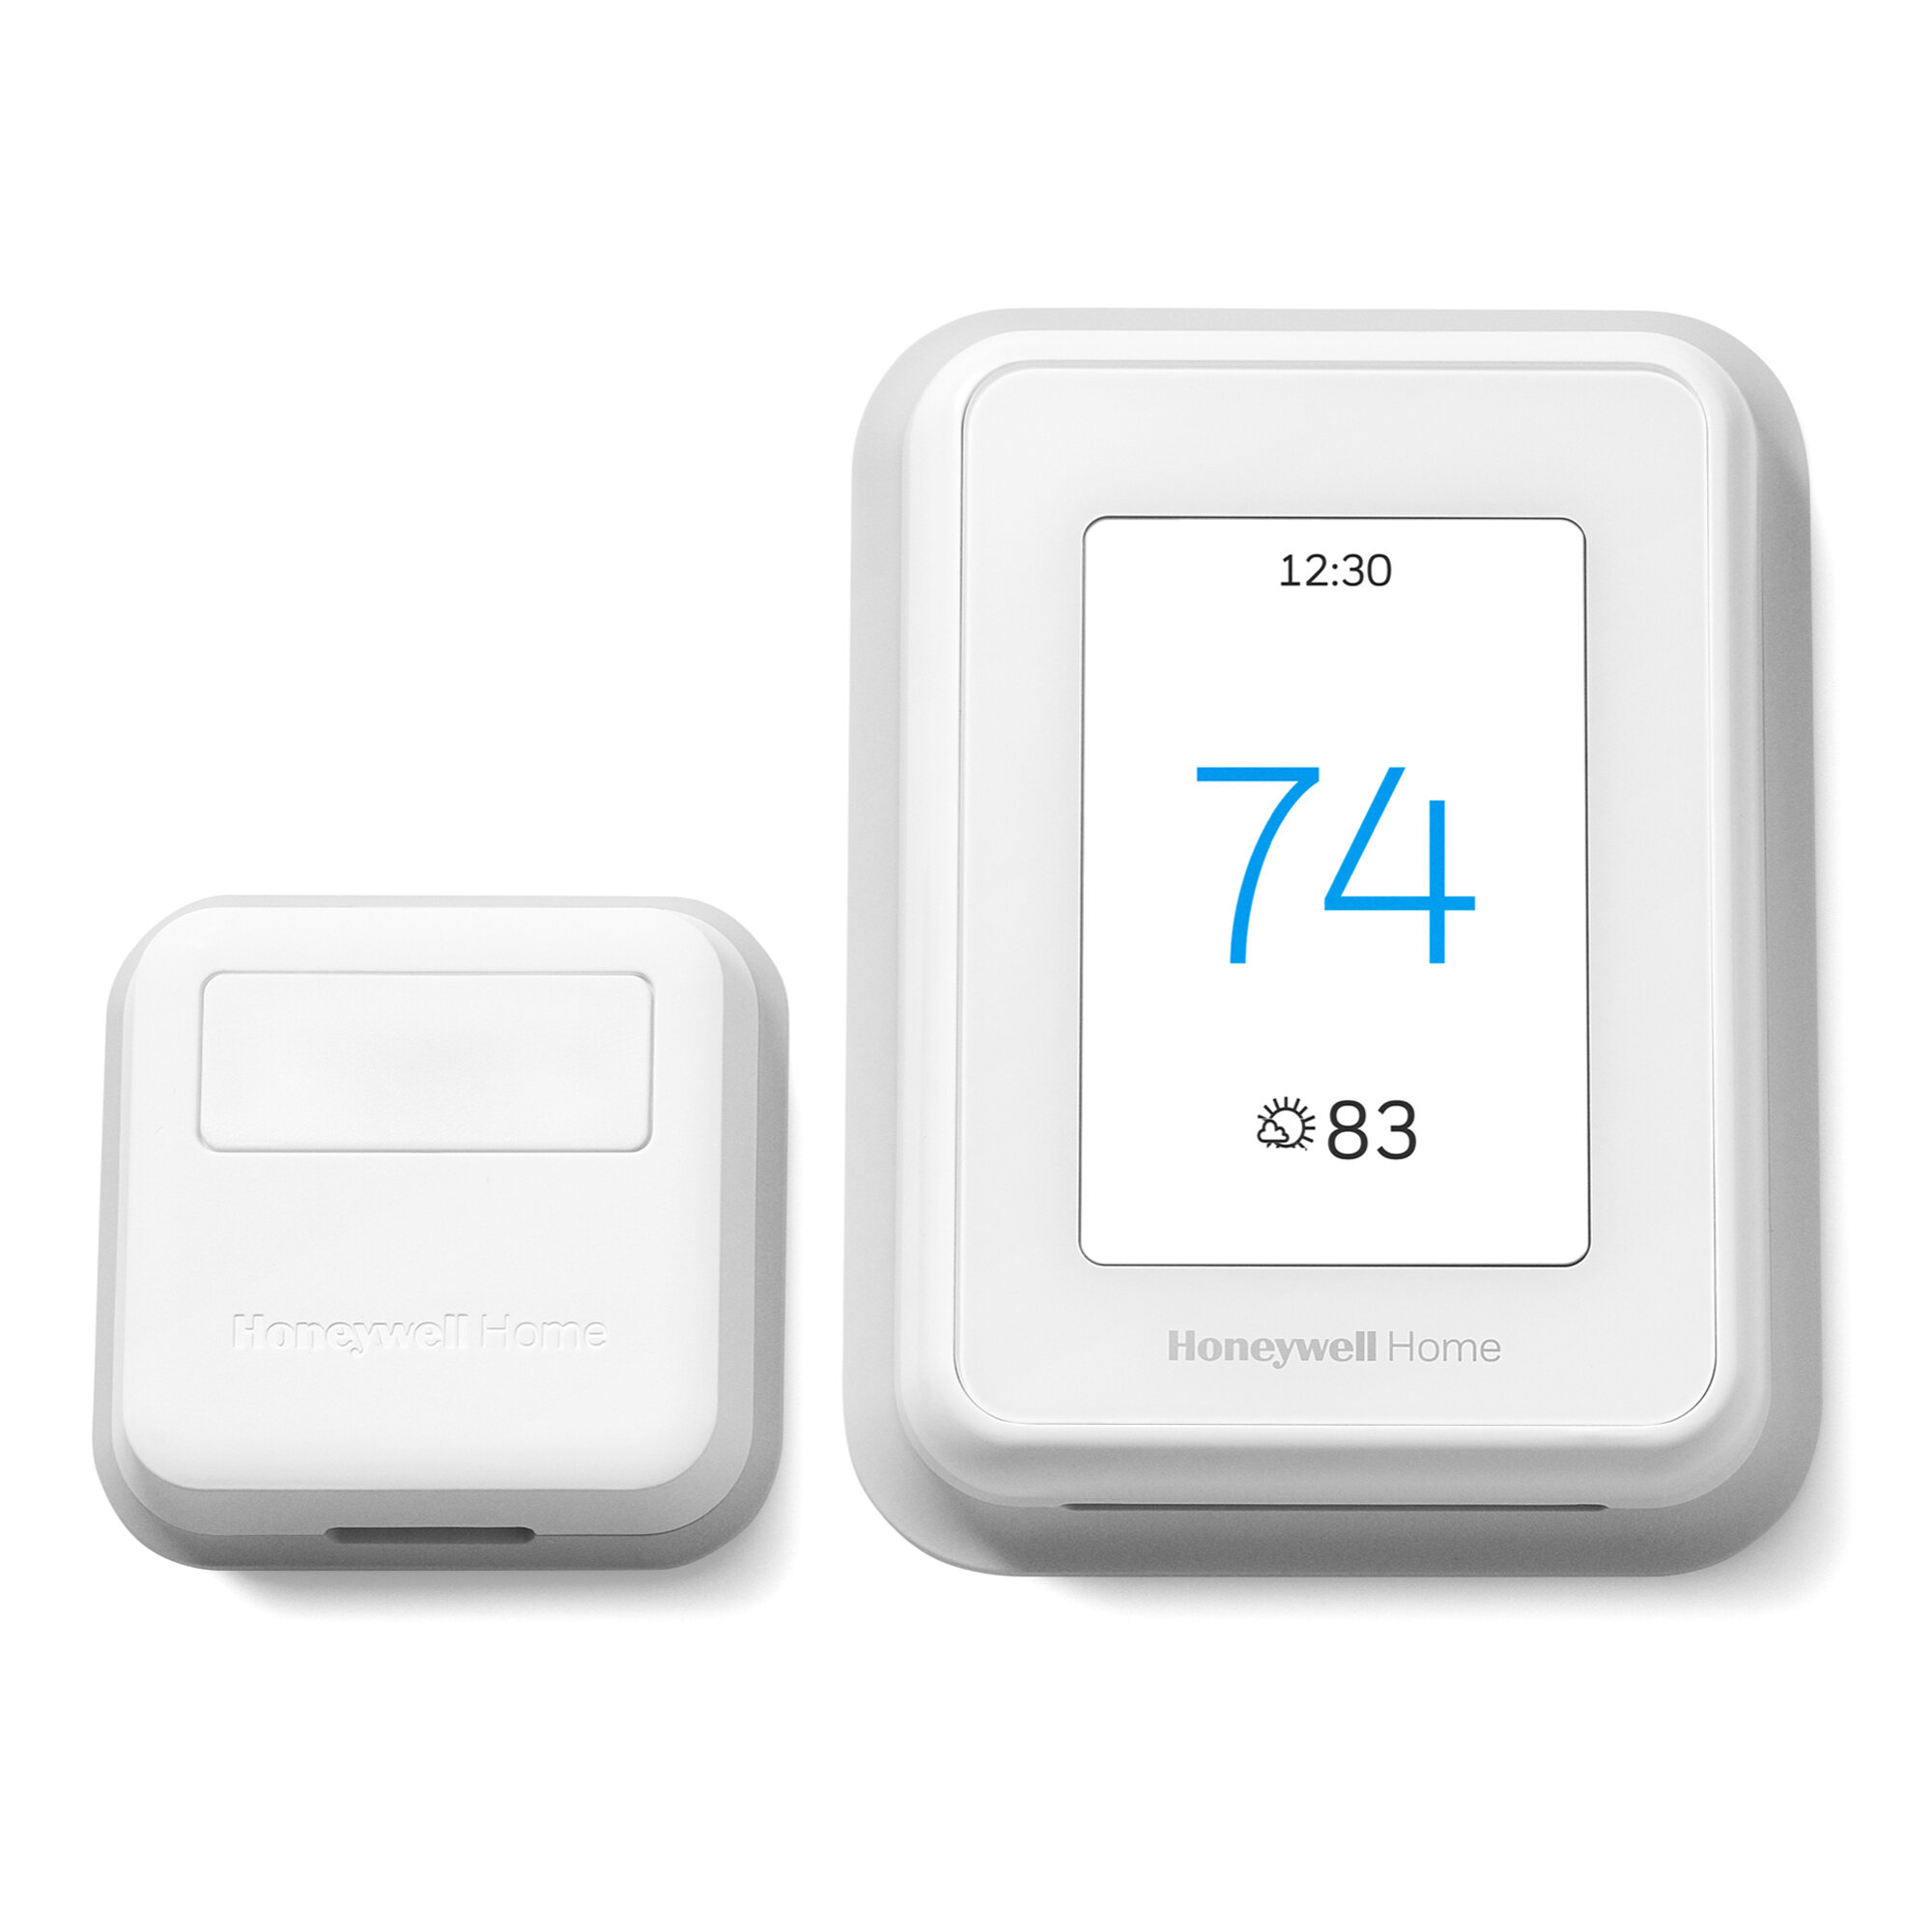 T8490 Digital Room Thermostat with Humidity Control